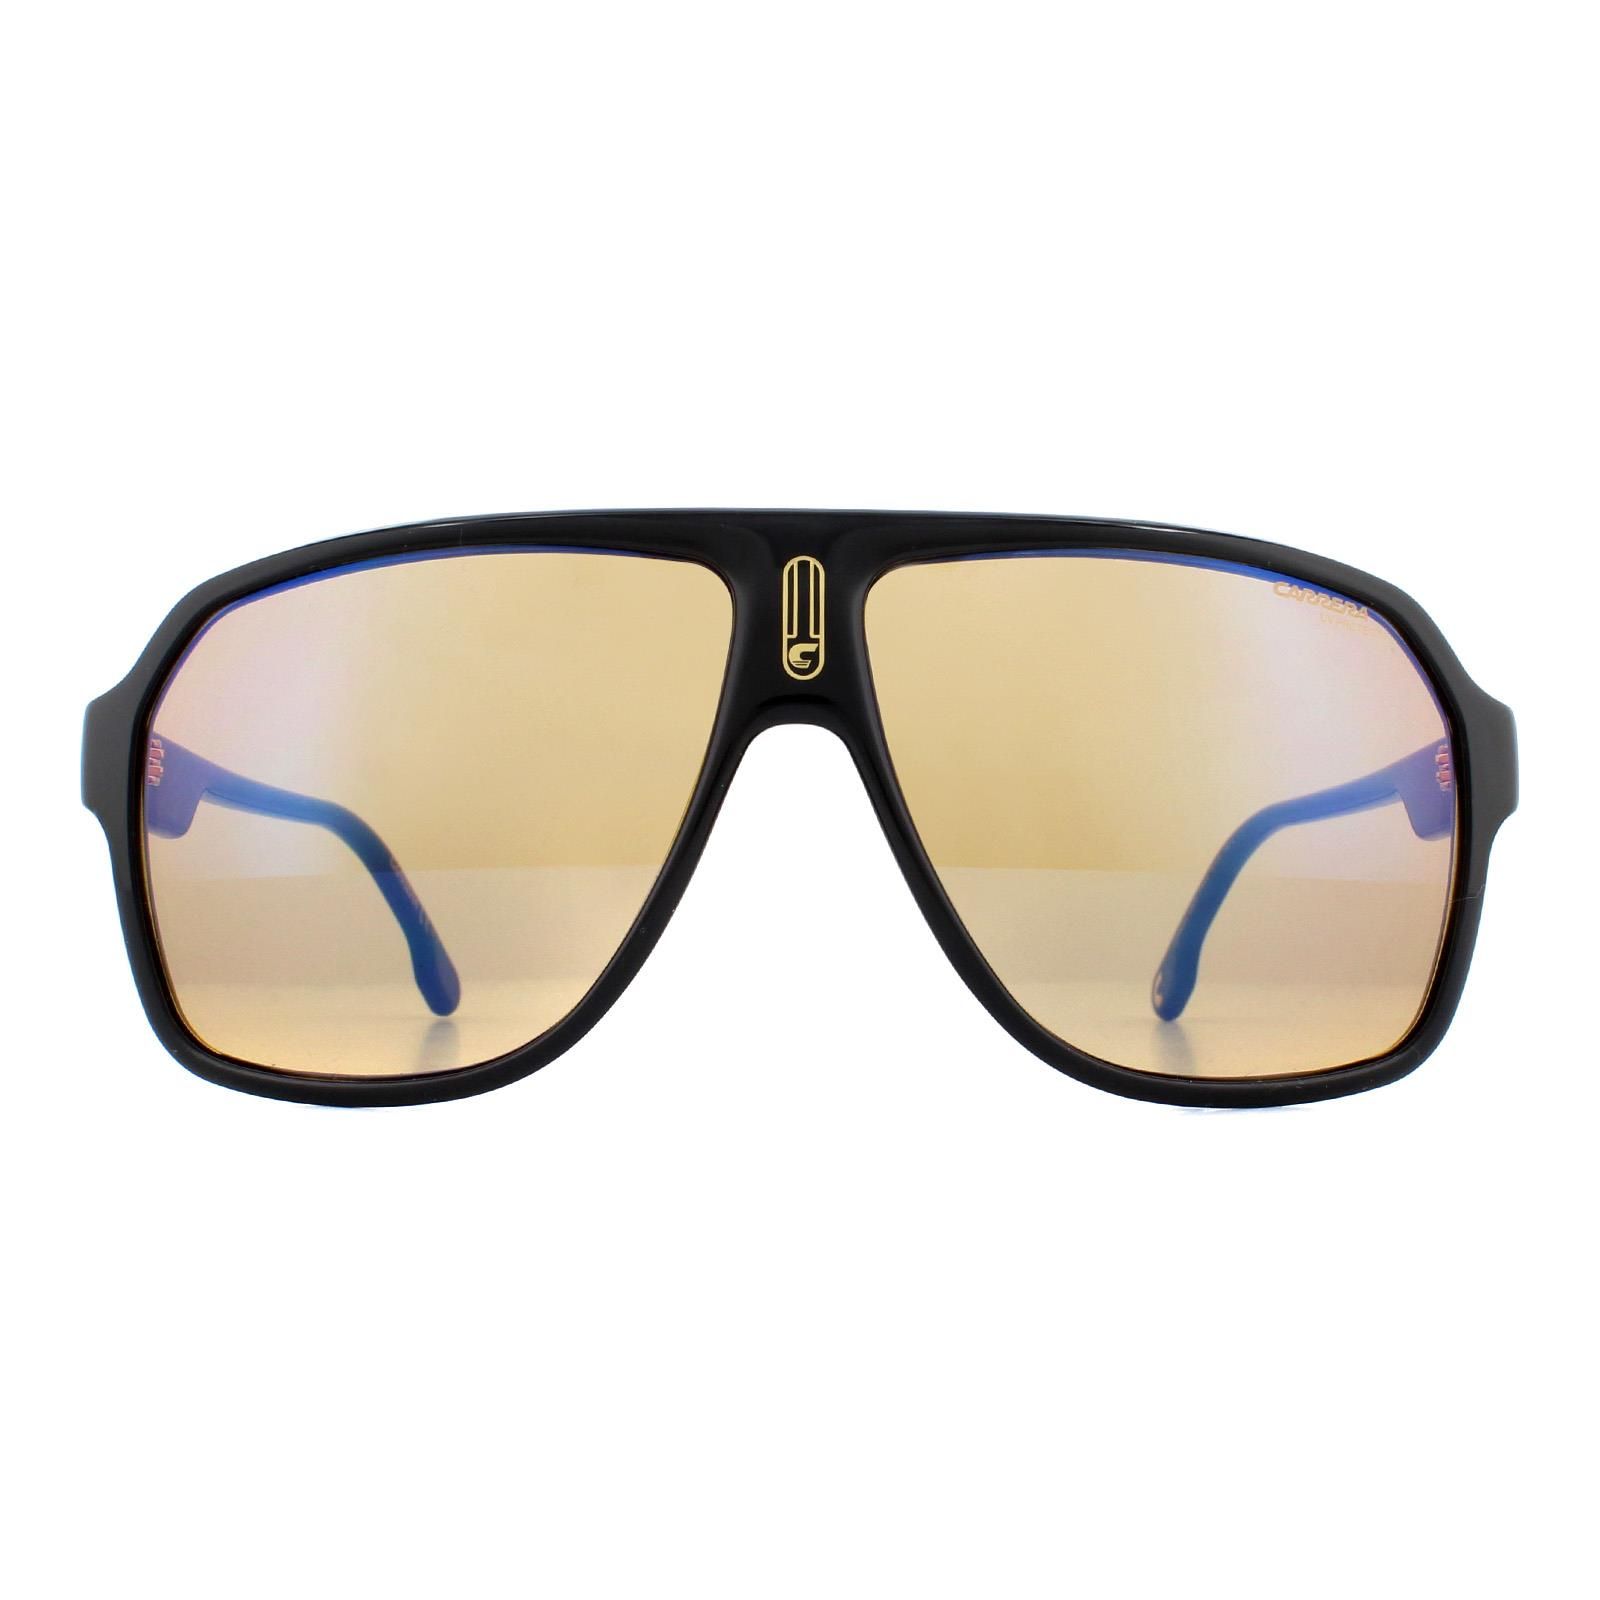 Carrera Sunglasses 1030/S 71C Z0 Black Yellow are a classic Carrera style with large lenses and signature branding on the temples and frame front.